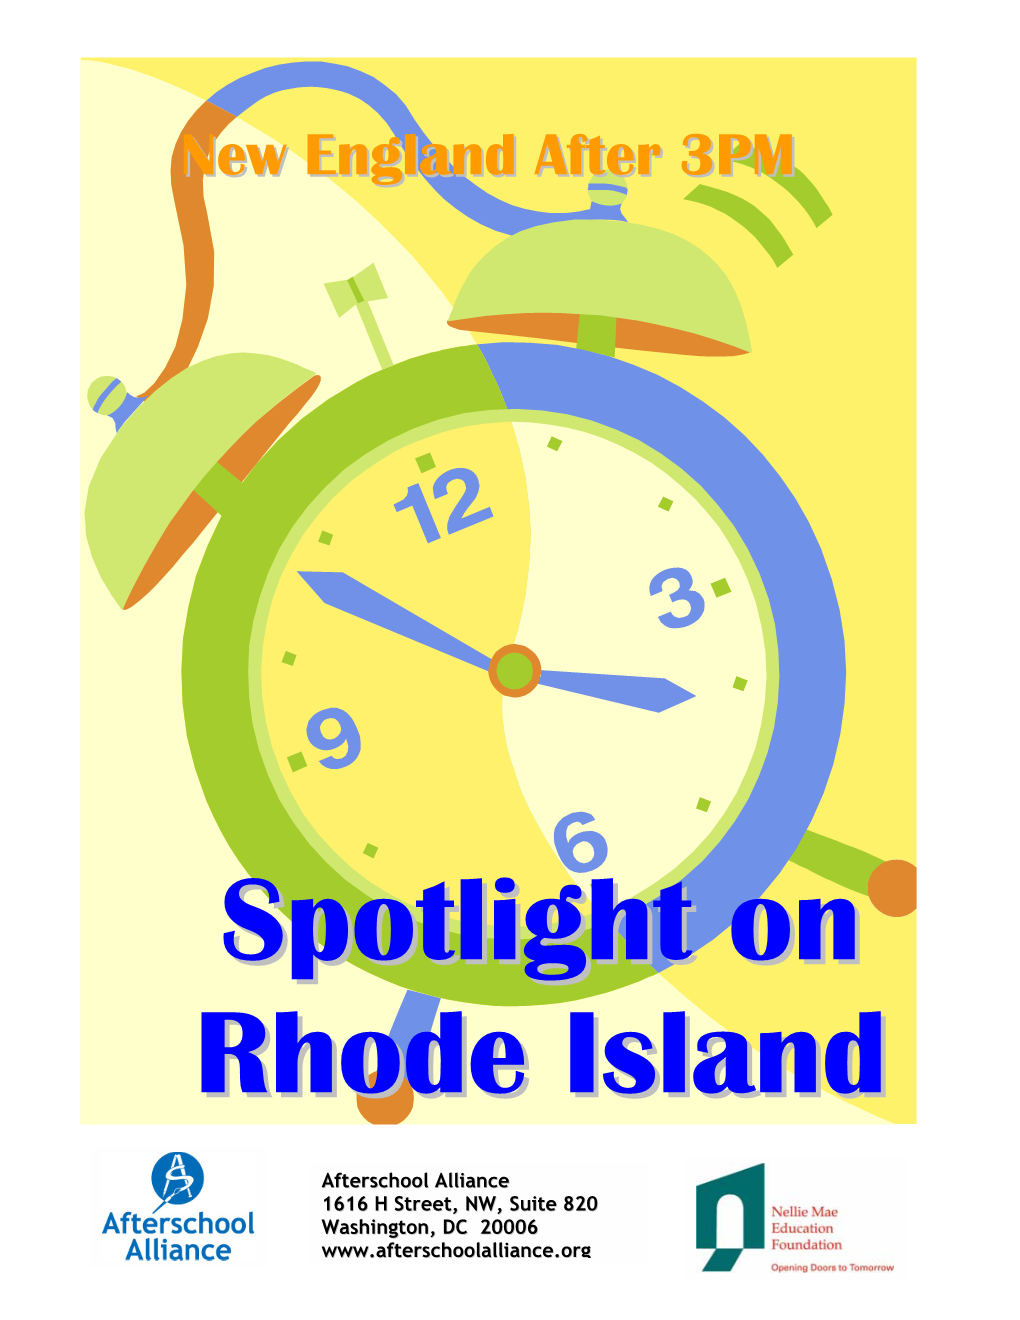 Municipal Leaders See Afterschool As an ‘Absolute Necessity’ for Rhode Island